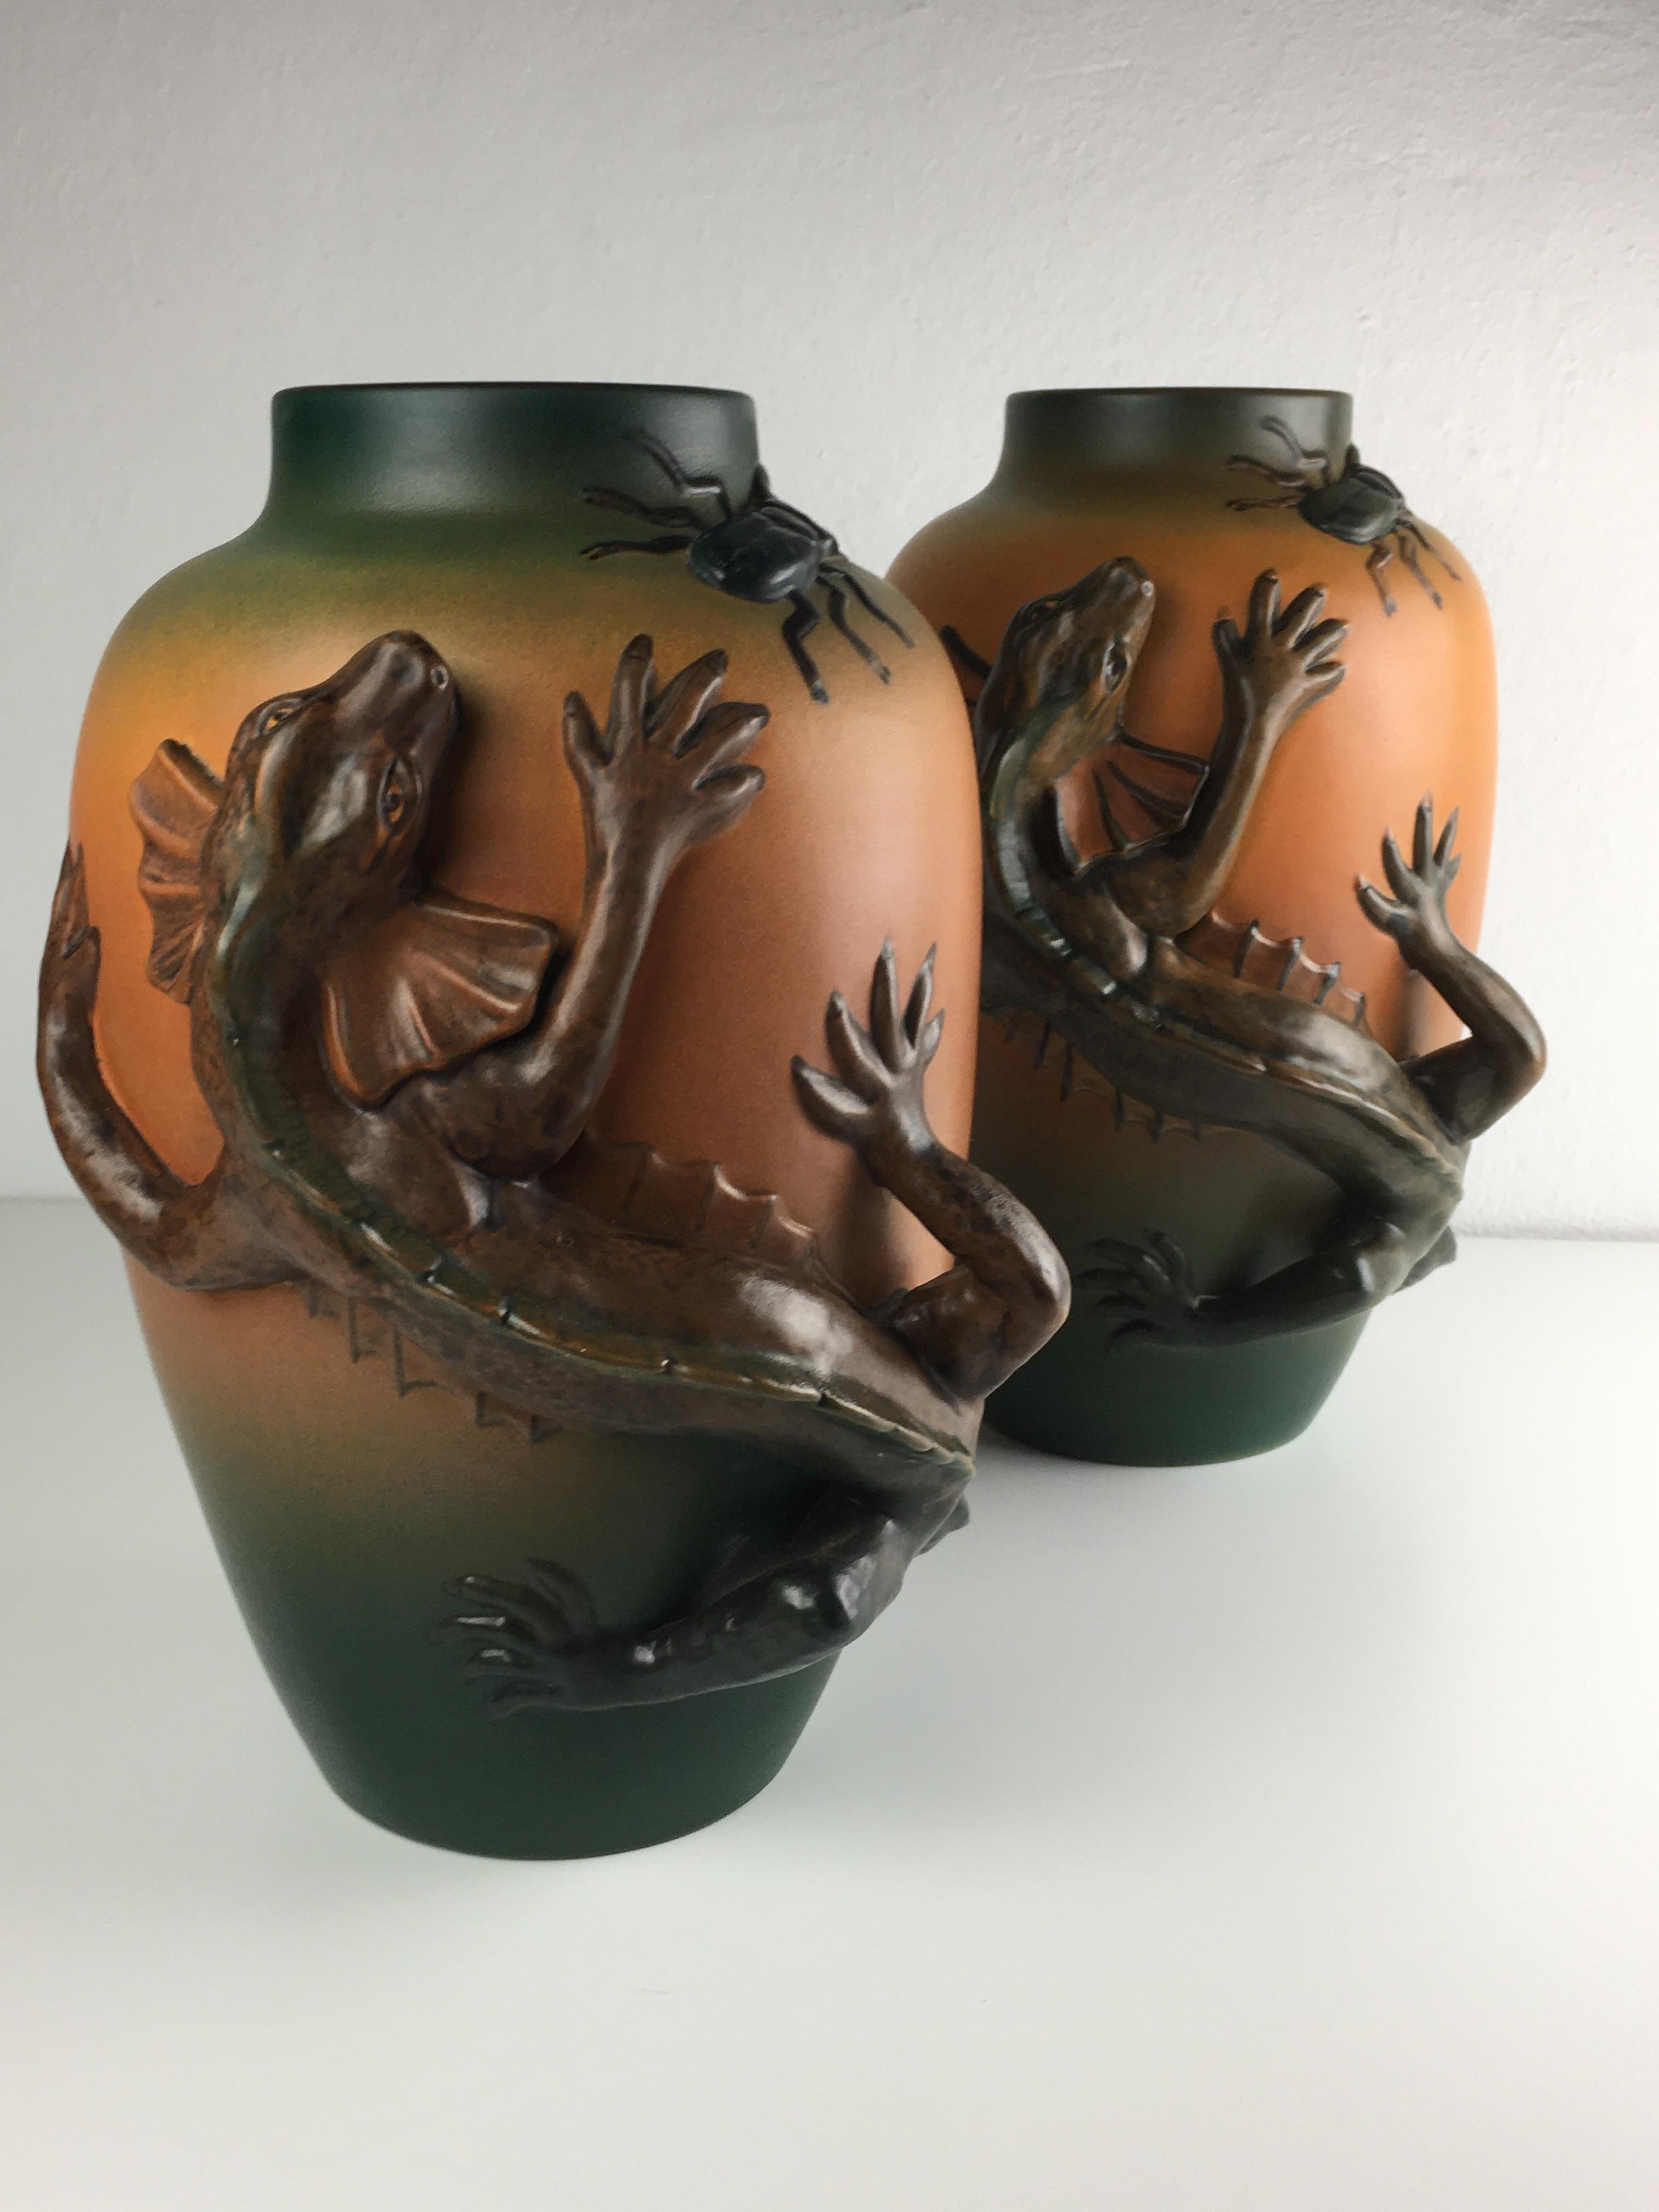 Rare set of two Danish Art Nouveau lizard vases by Lauritz Jensen for Ipsens Enke in 1899.

The art nuveau vases feature a very well made lively lizard on the frontside of the vases chasing a beetle cravling on the side of the vases are in very good